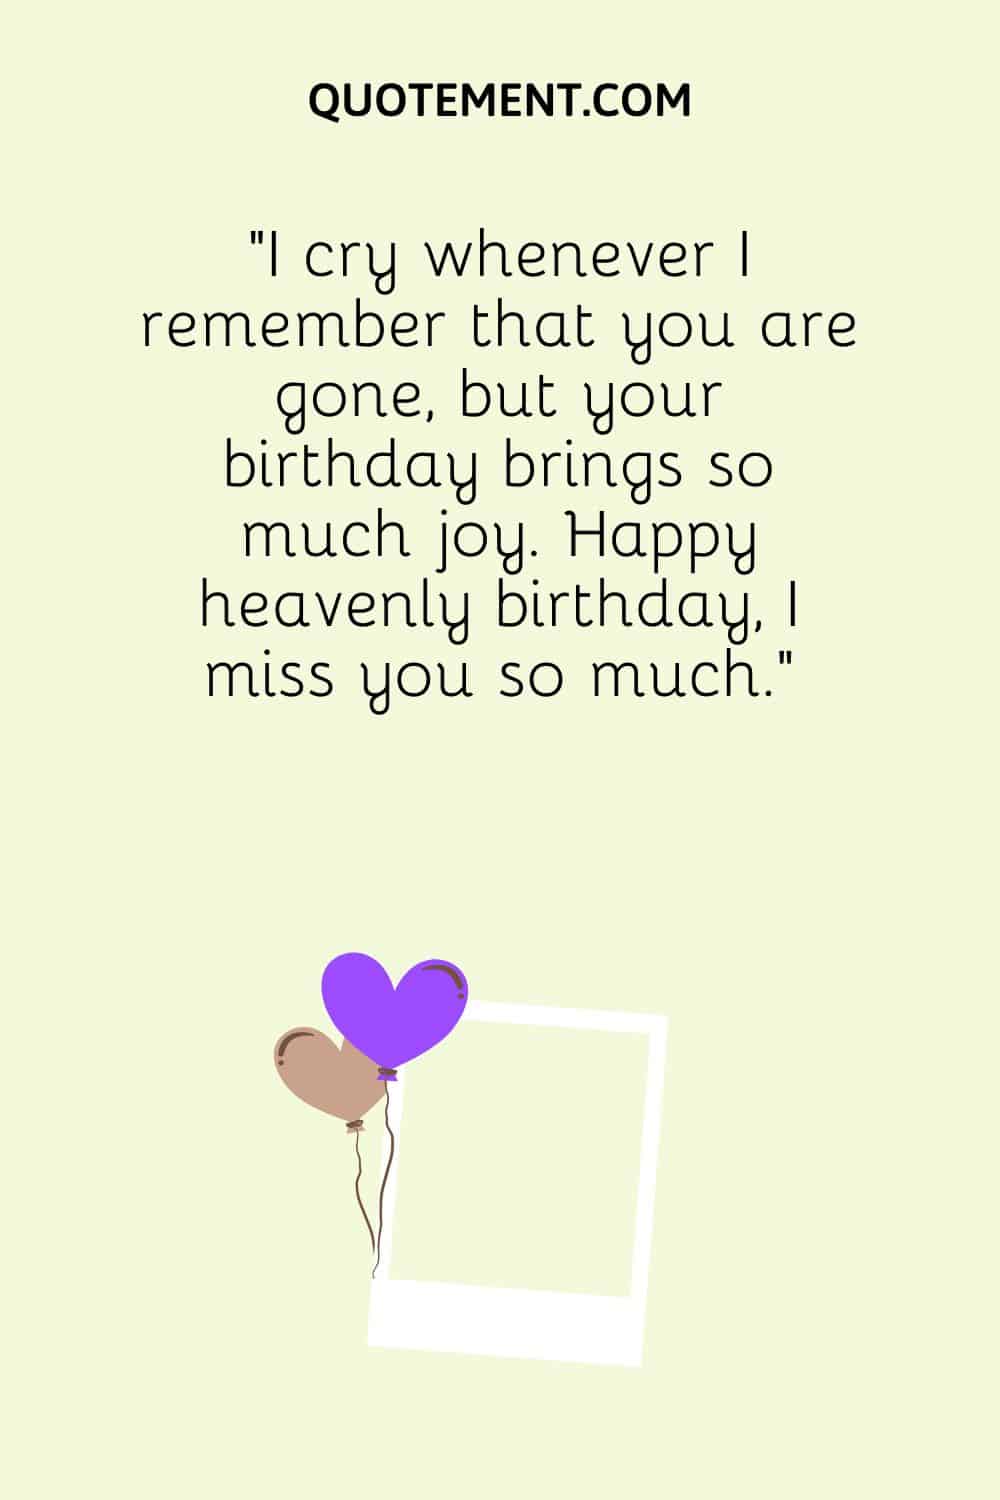 I cry whenever I remember that you are gone, but your birthday brings so much joy